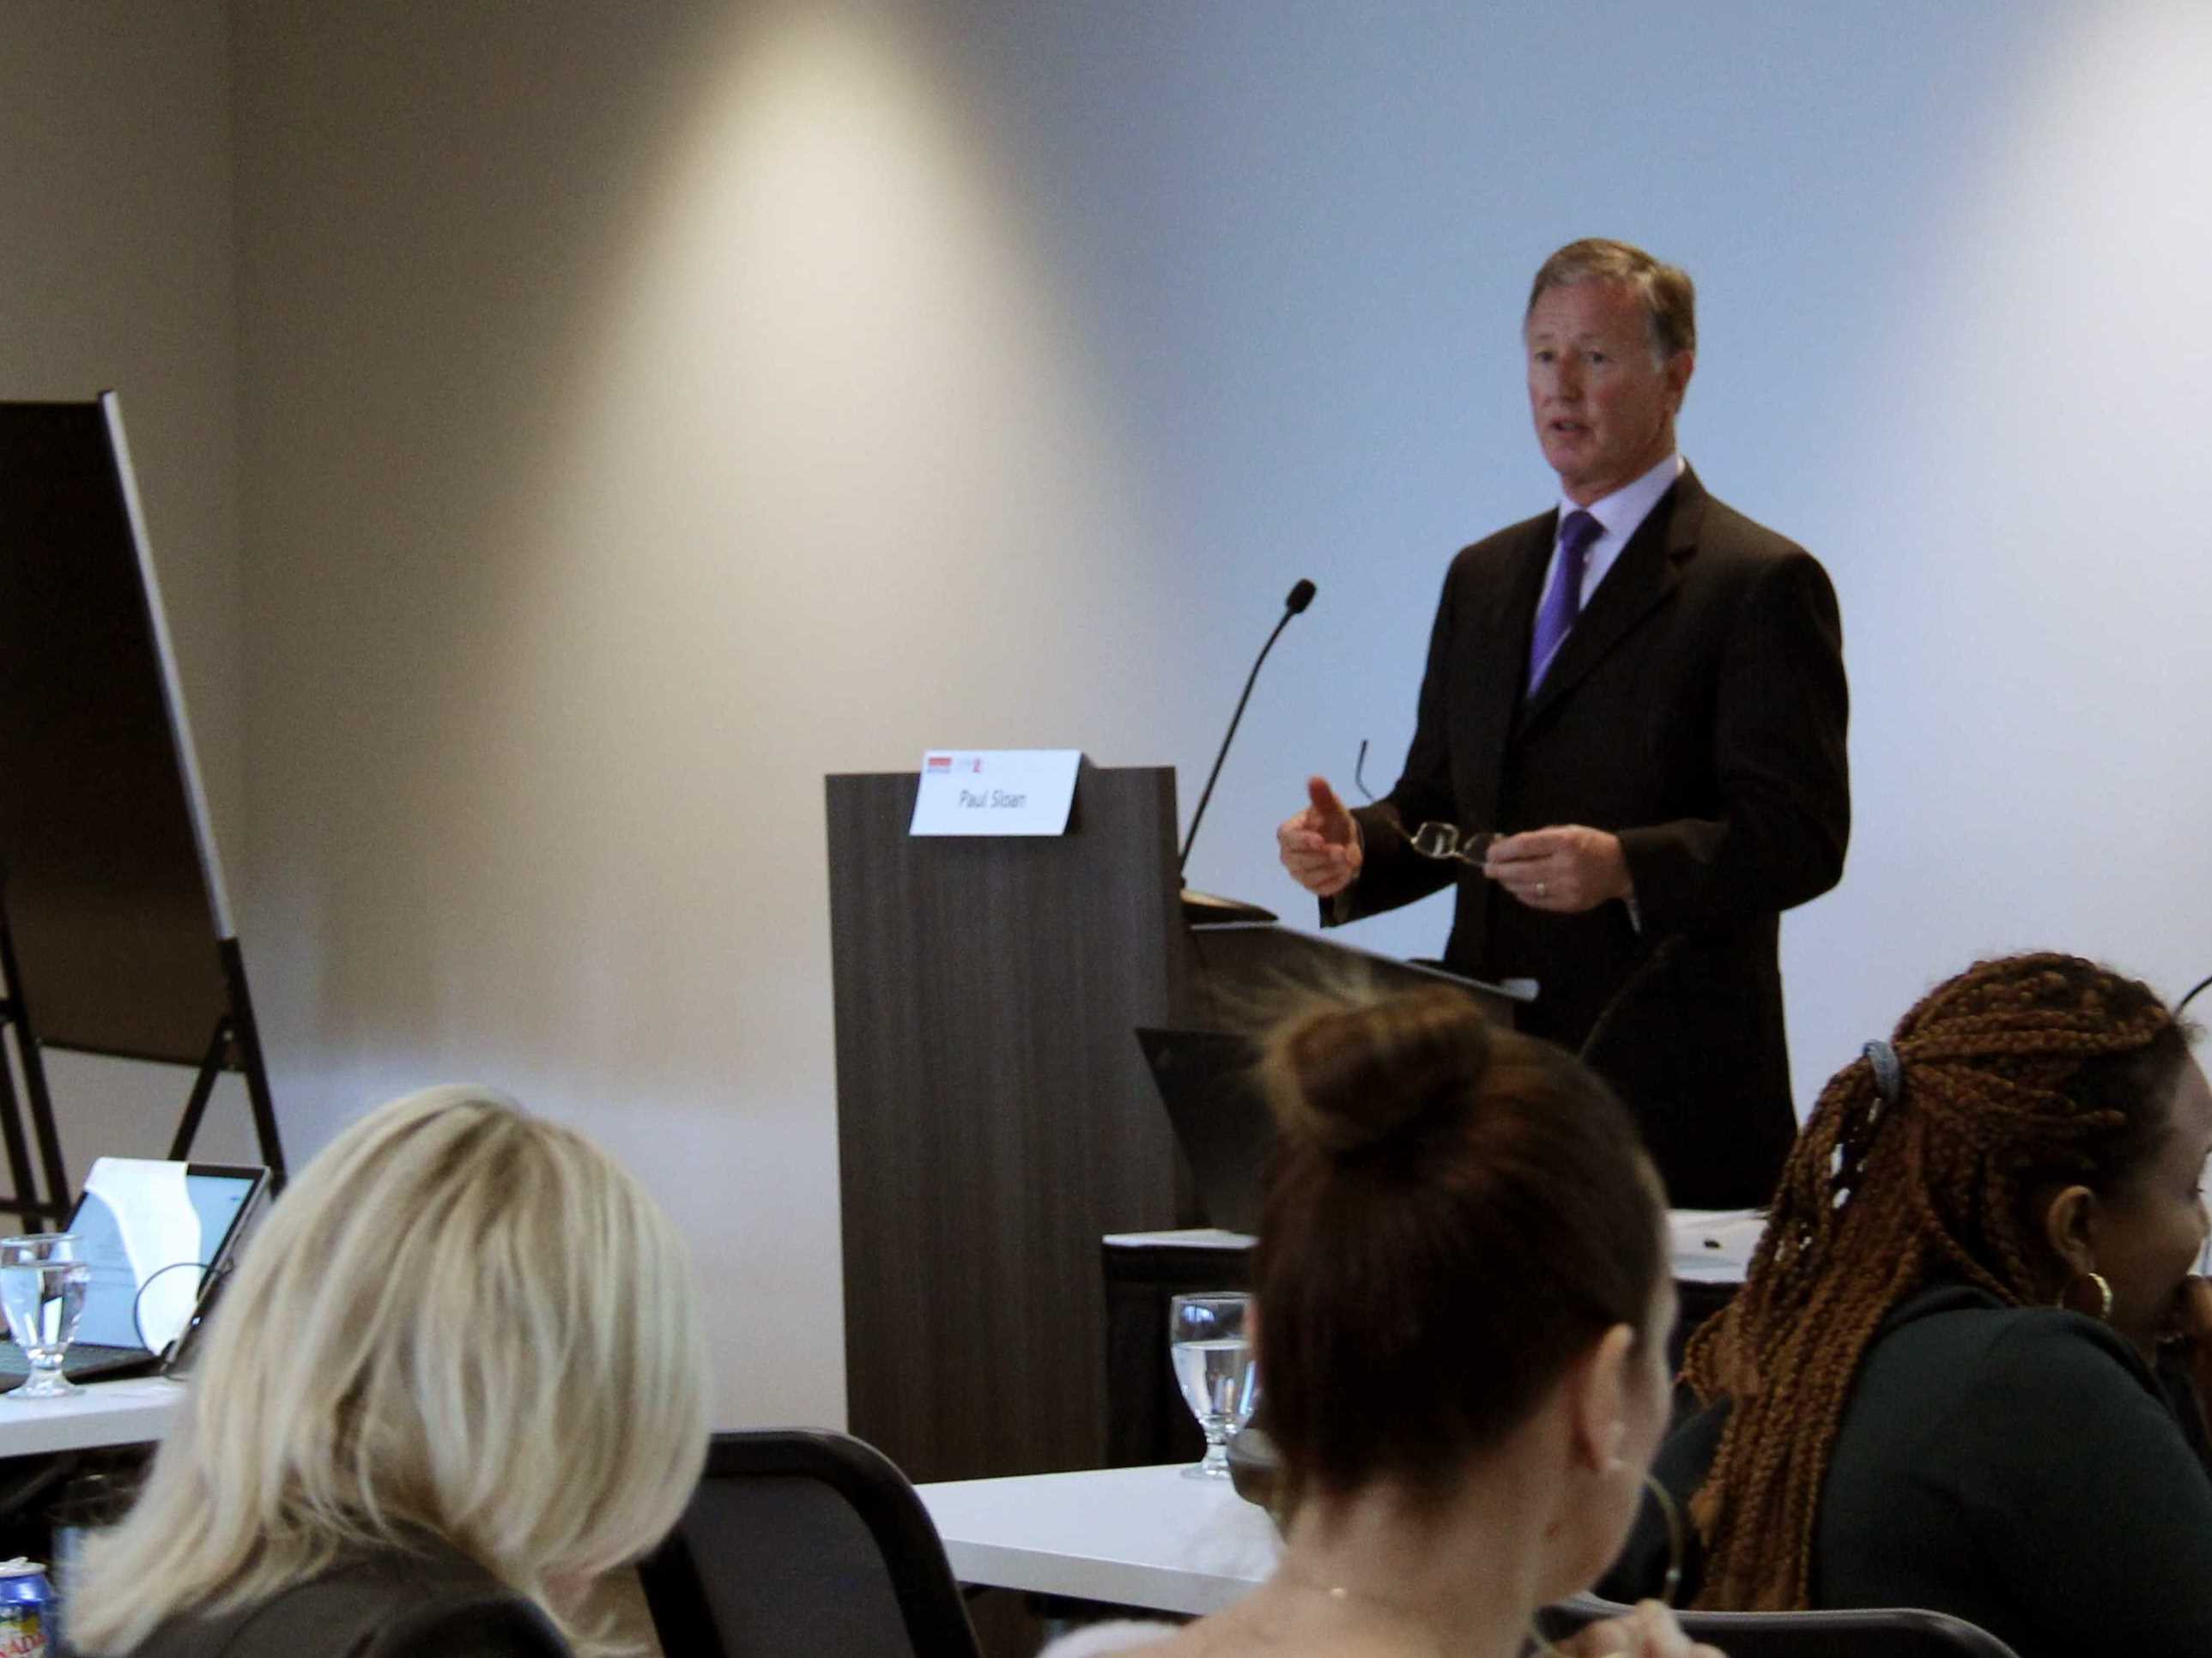 Early Resolutions Manager Paul Sloan speaks to Osgoode Professional Development’s annual conference on Advanced Issues in Special Education Law, Toronto.